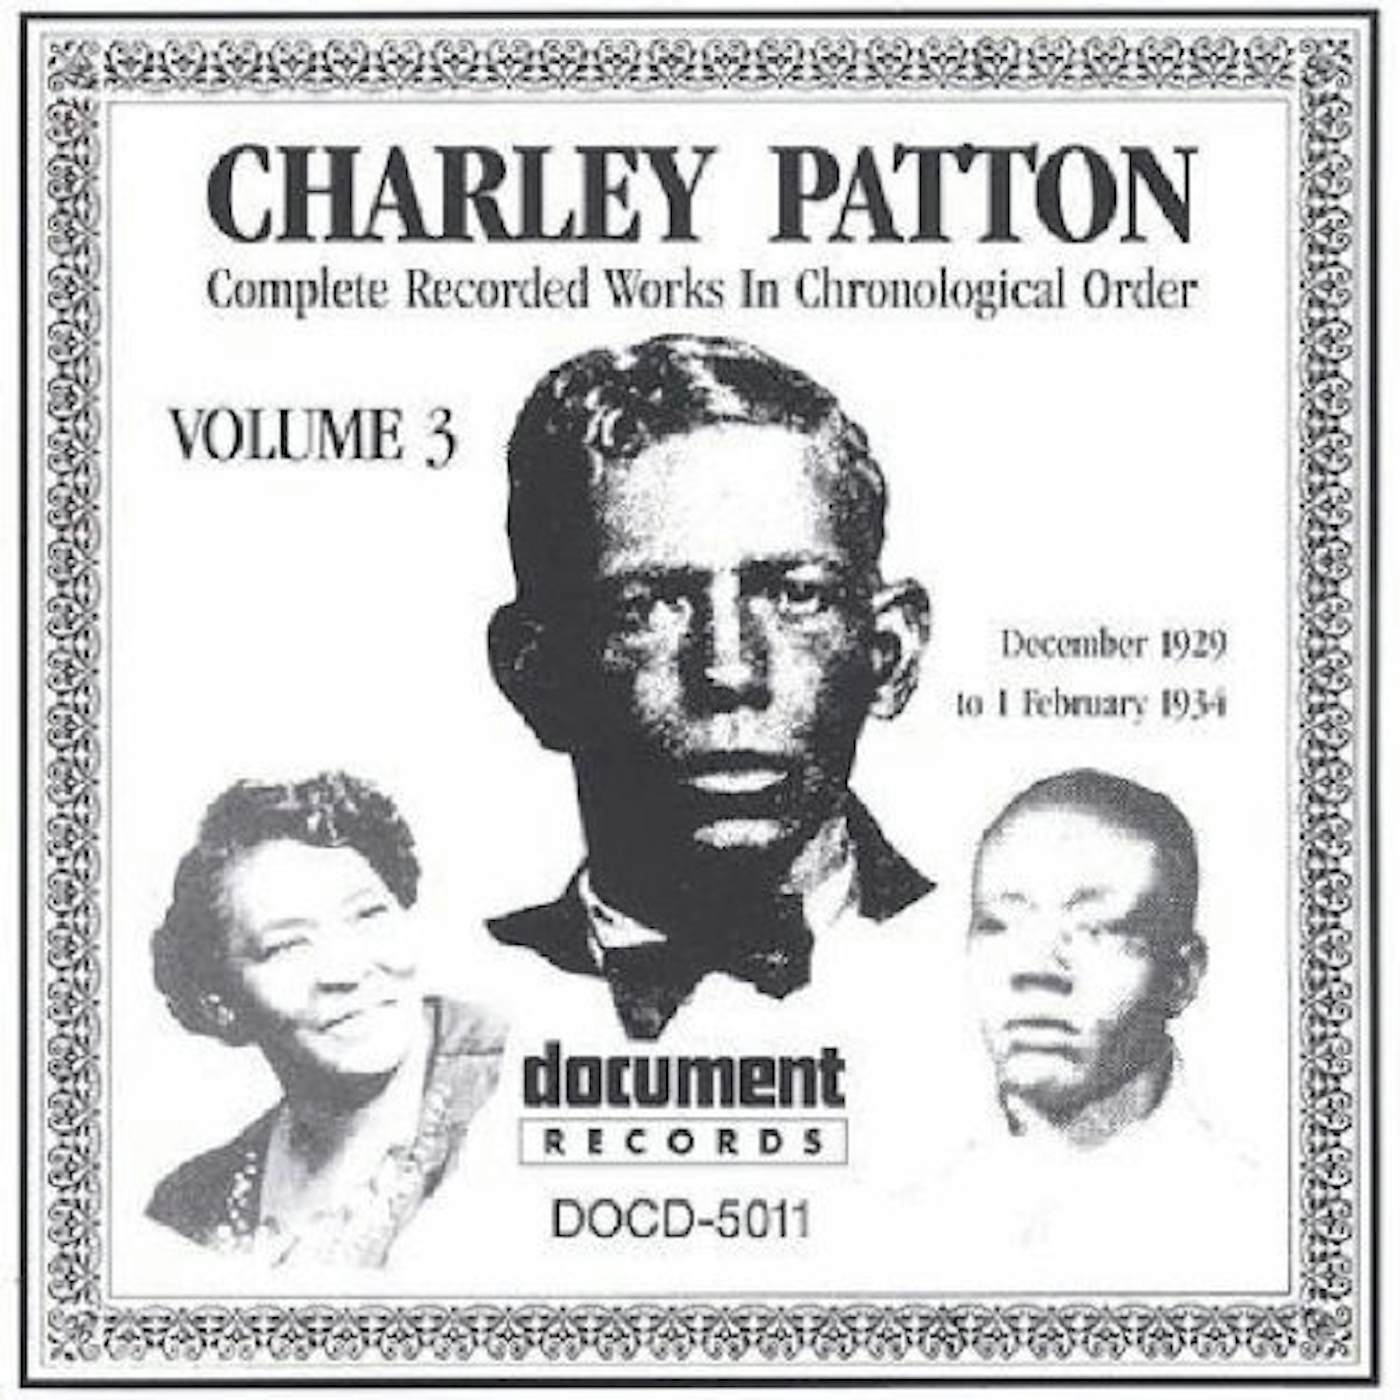 Charley Patton COMPLETE RECORDINGS 1929-1934 VOL. 3 (1929-1934) CD